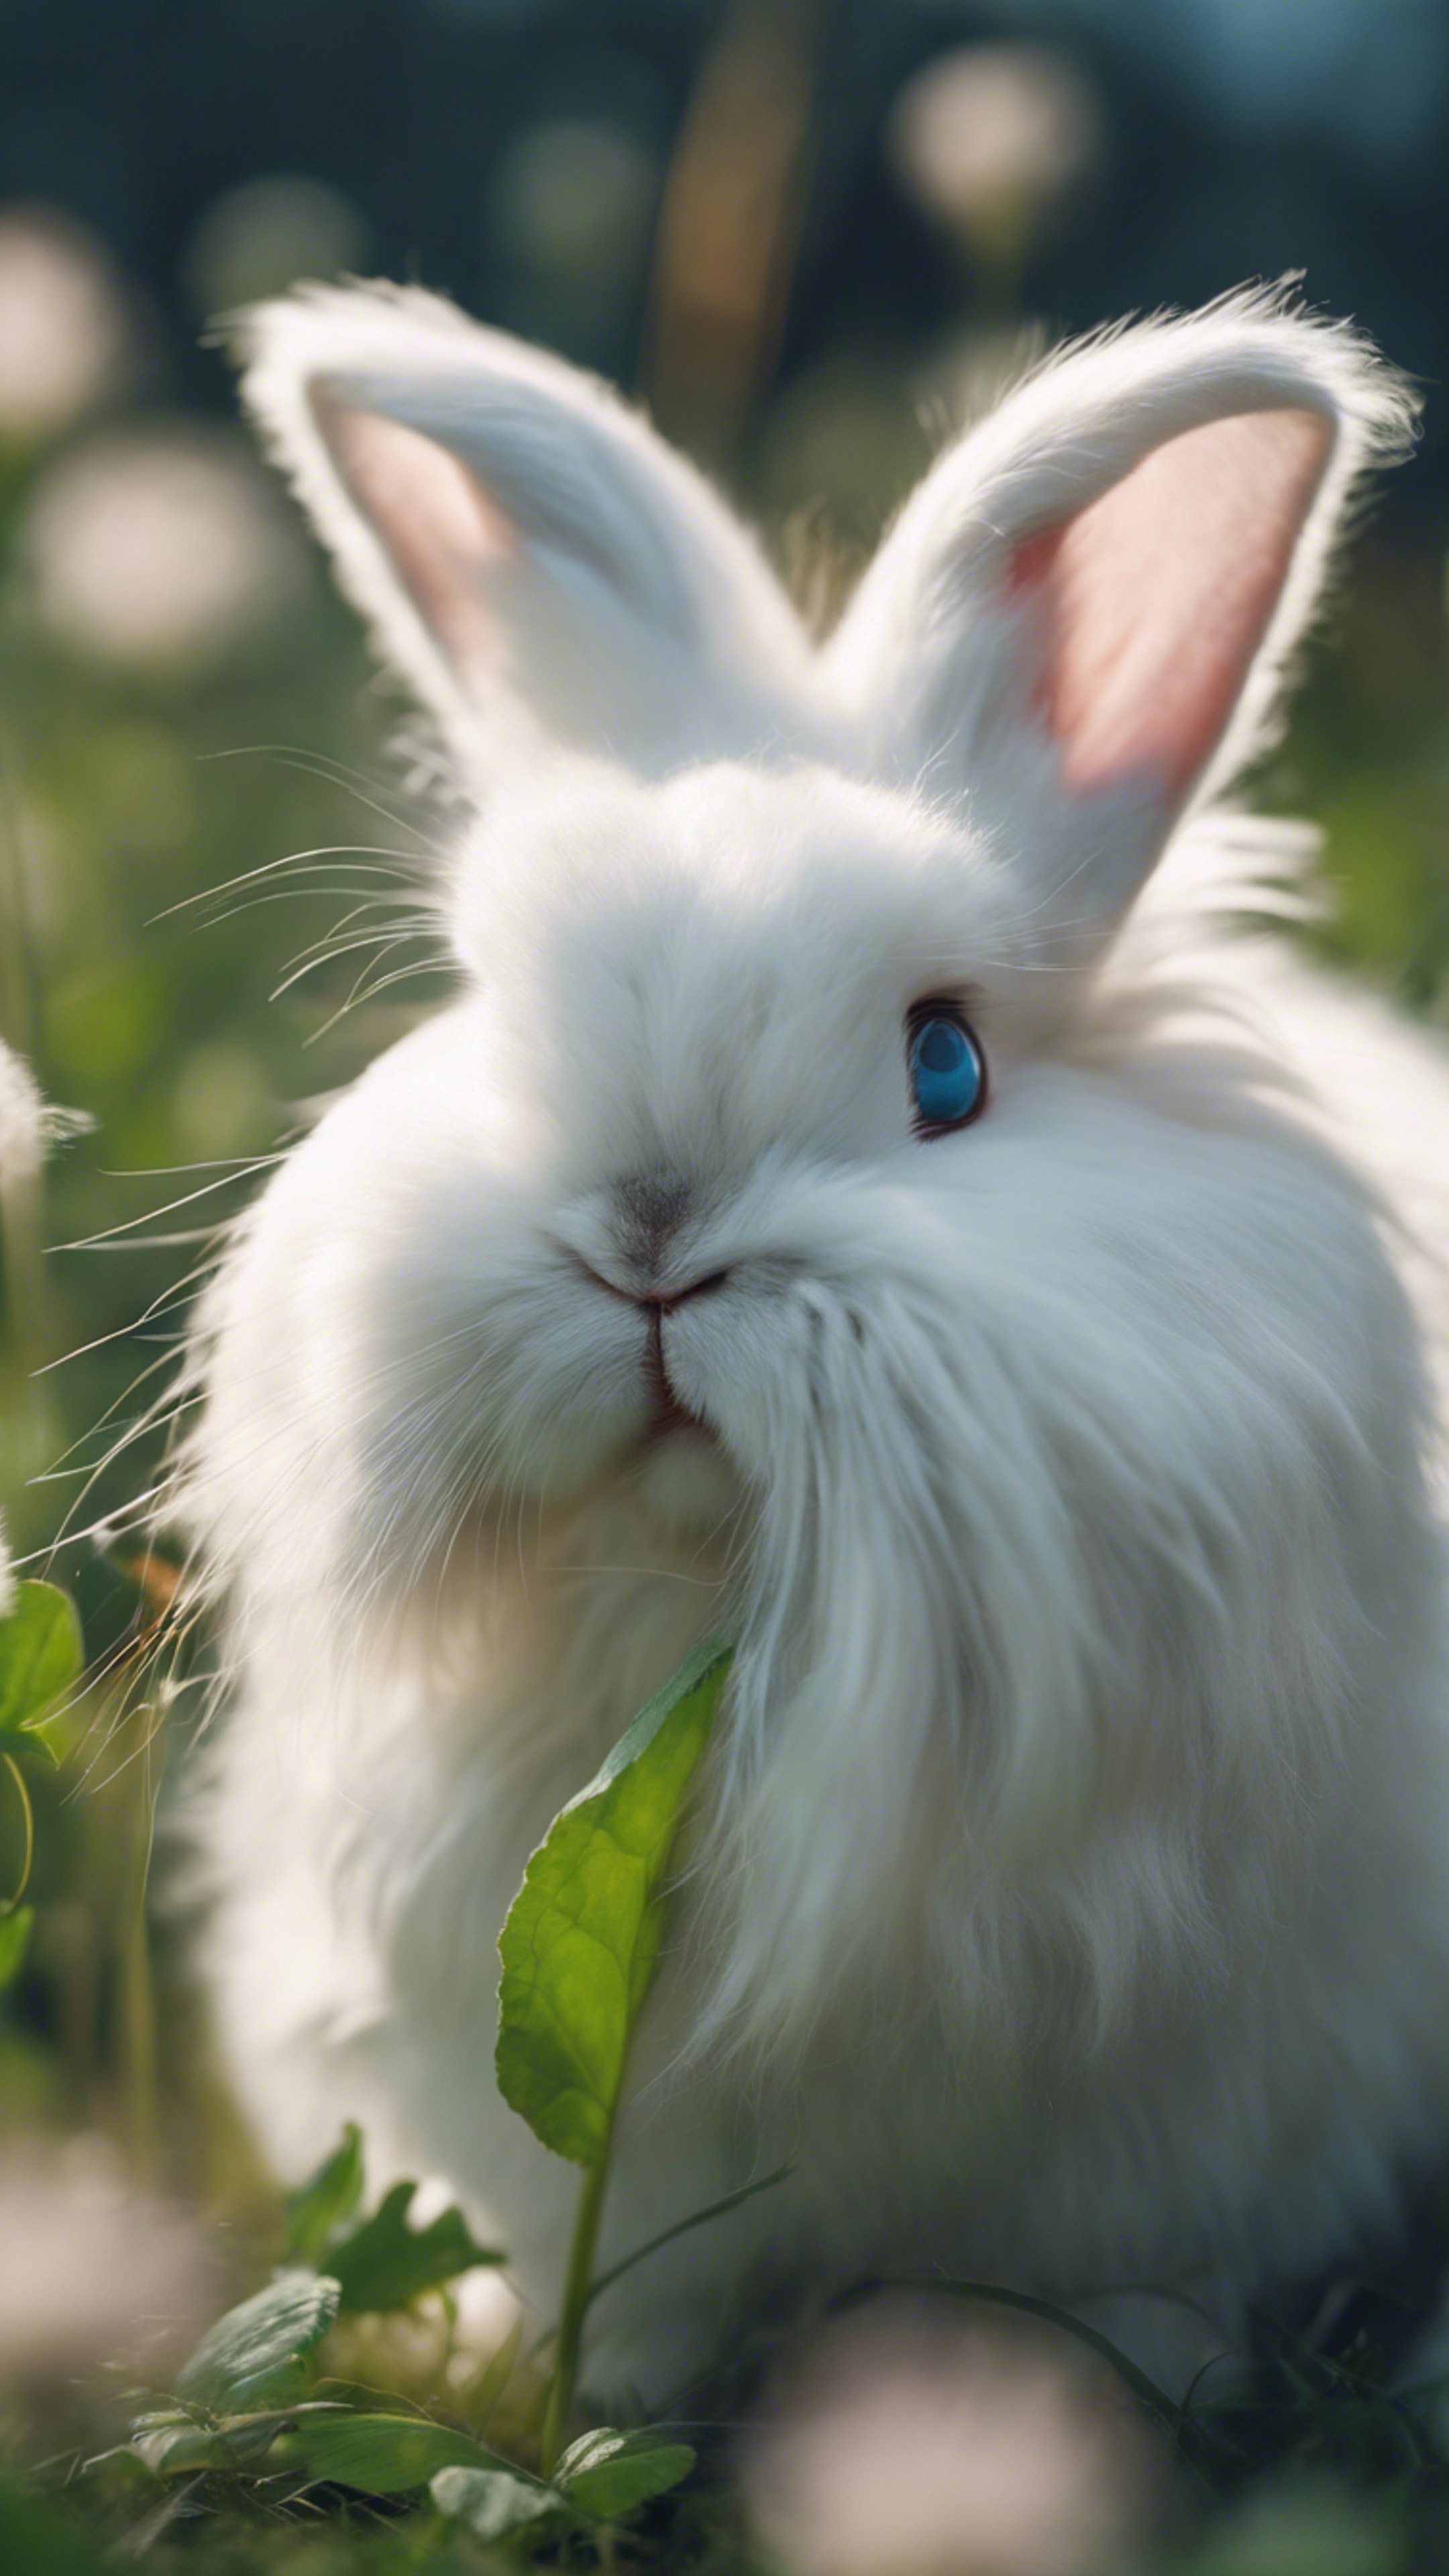 A fluffy angora rabbit with big blue eyes, nestled snugly in a patch of clover.壁紙[a1edfdea4e4b4864b66c]